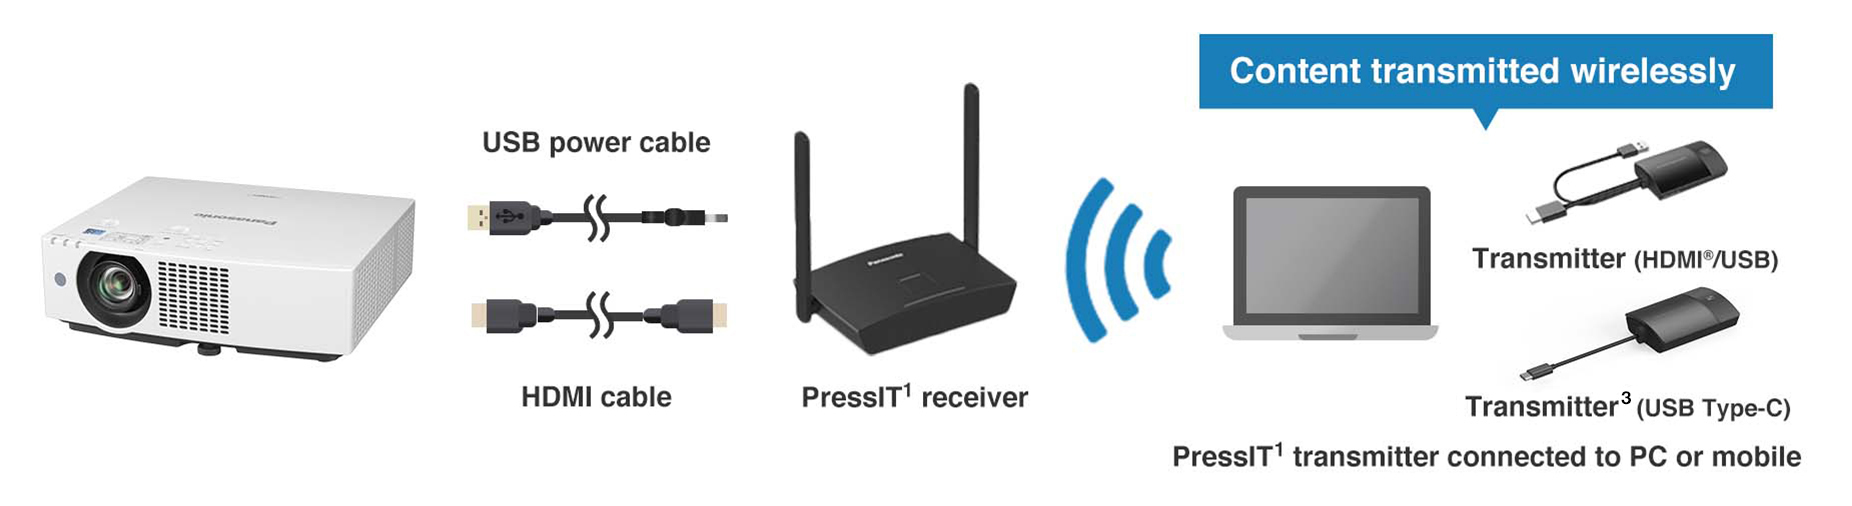 Easy QR Code Connection to Wireless LAN1